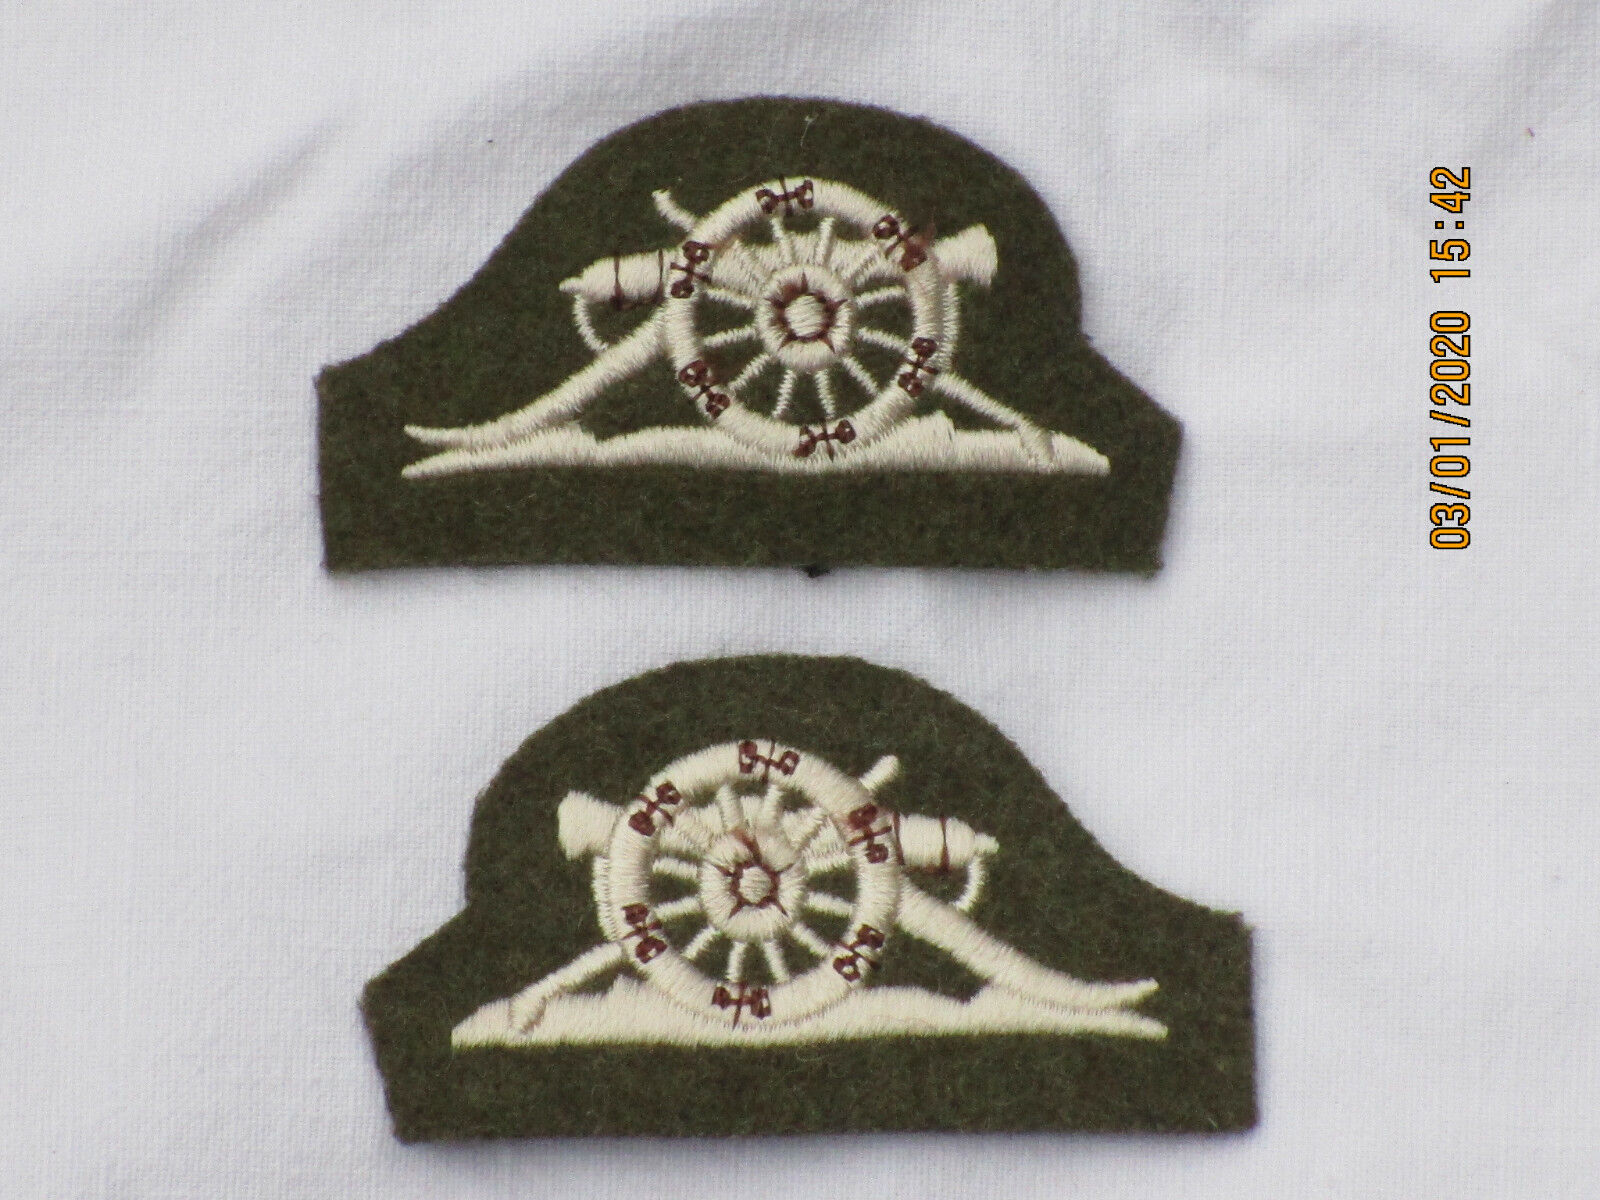 No. 2 Dress Abz. Royal Artillery, Cannon, Left & Right, British Army Badges